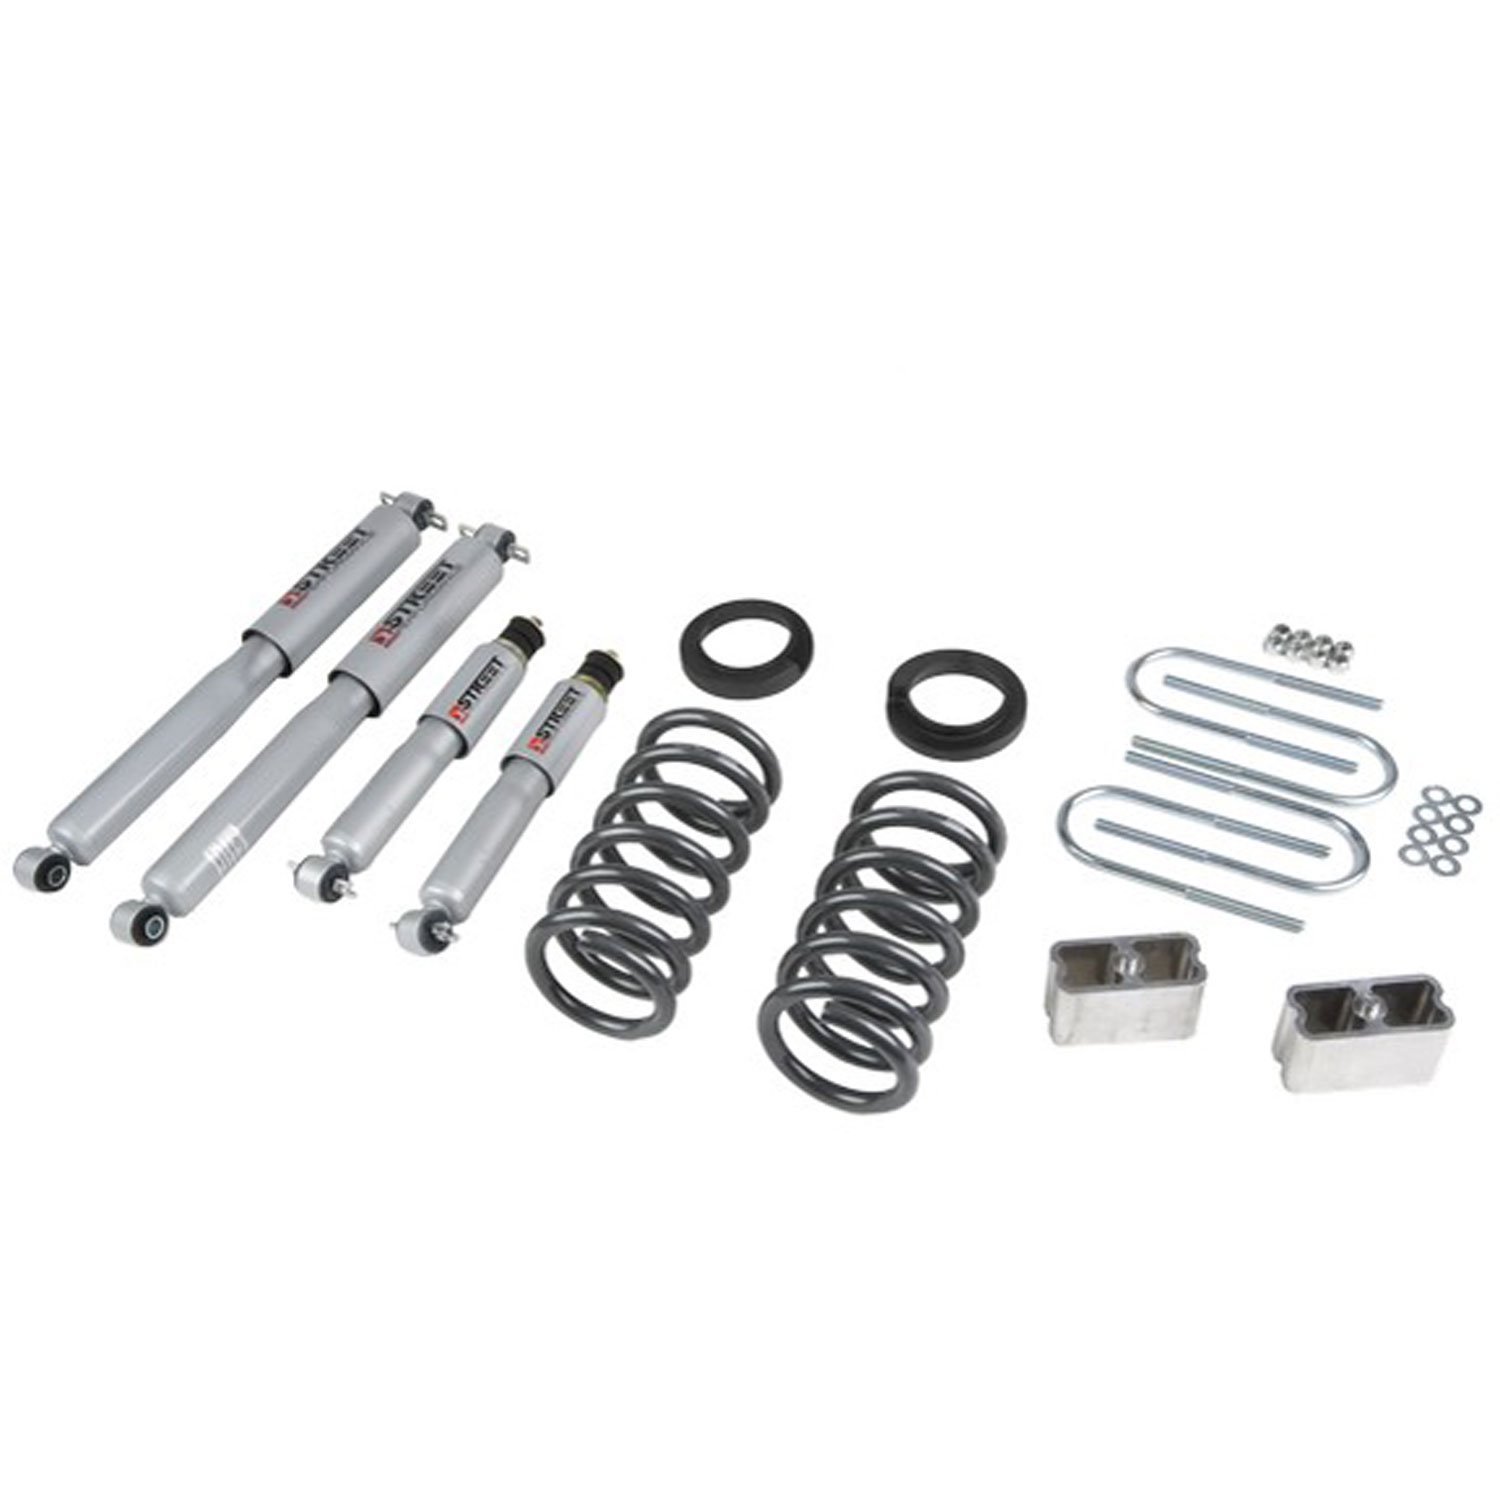 Complete Lowering Kit for 1982-2004 Chevy S10/GMC S15 Standard Cab